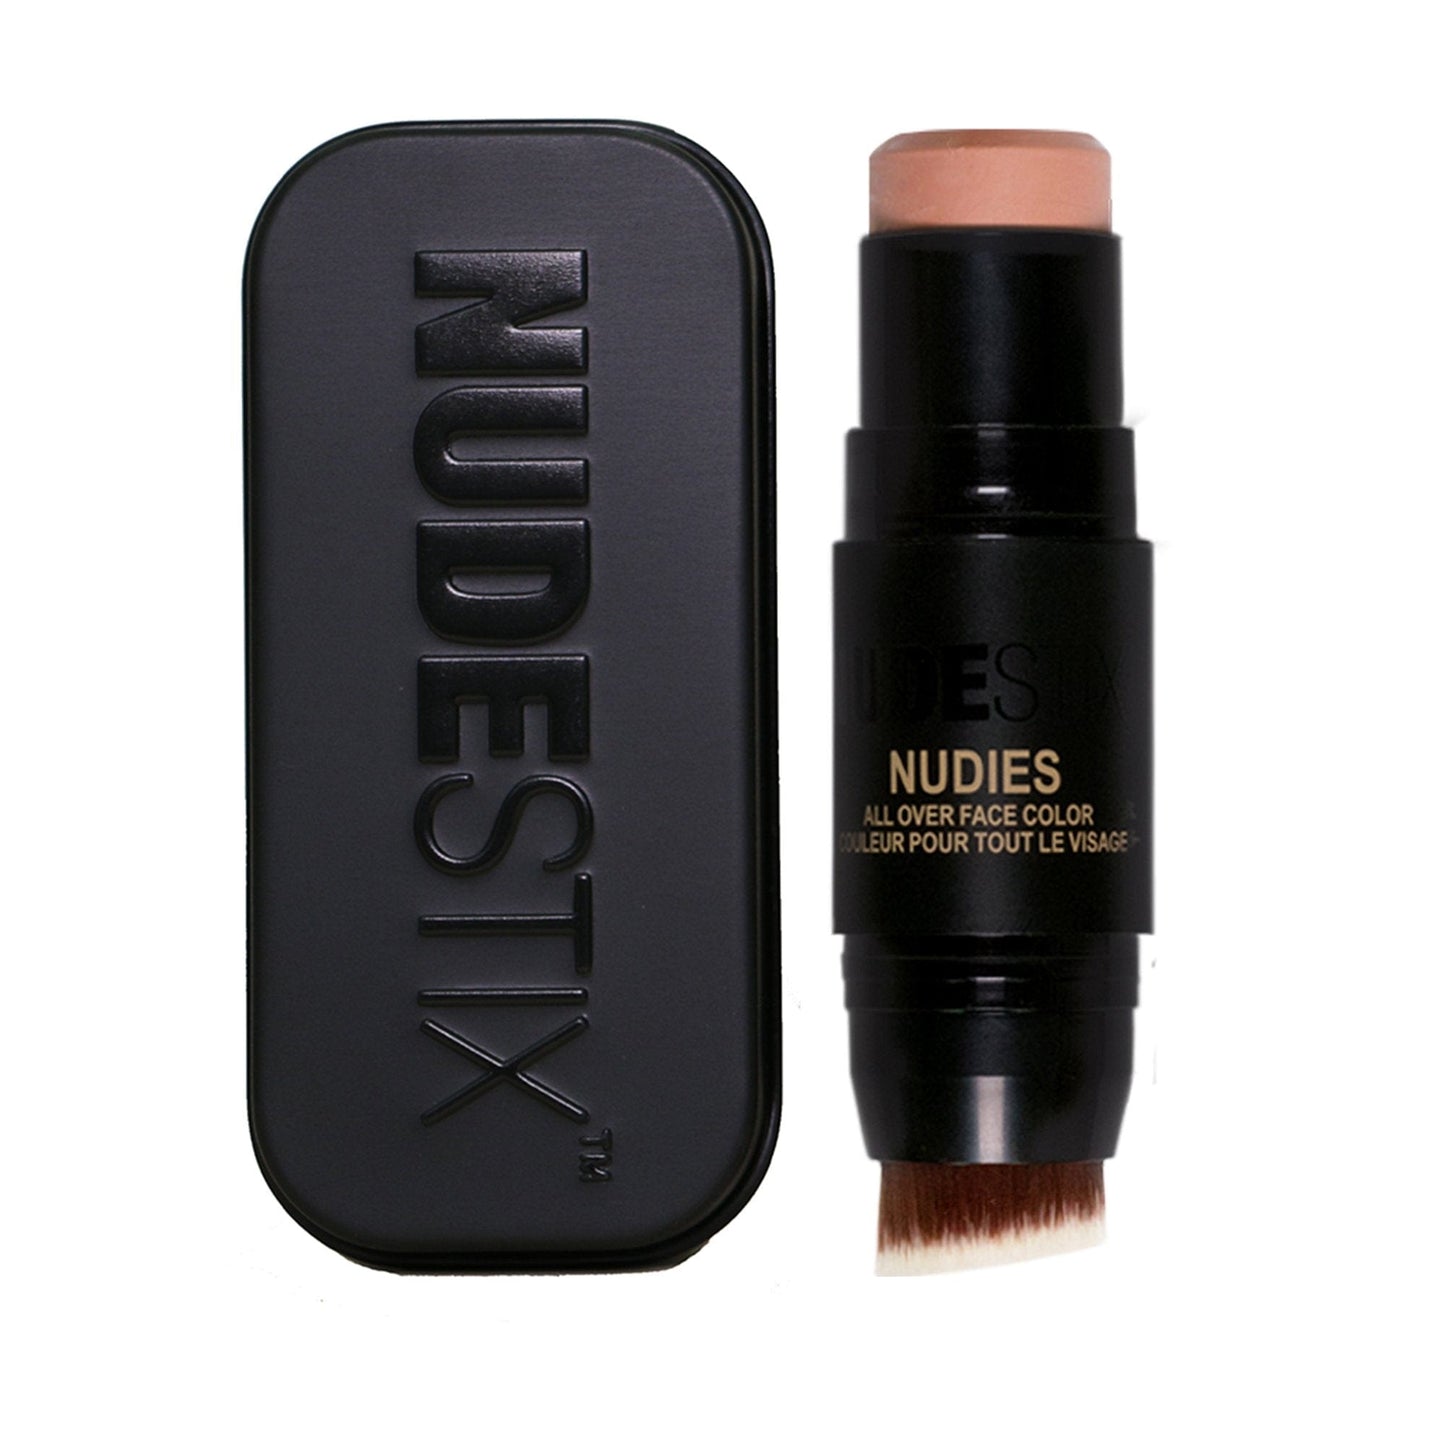 Nudies Blush Stick in shade Bare Back with Nudestix Can